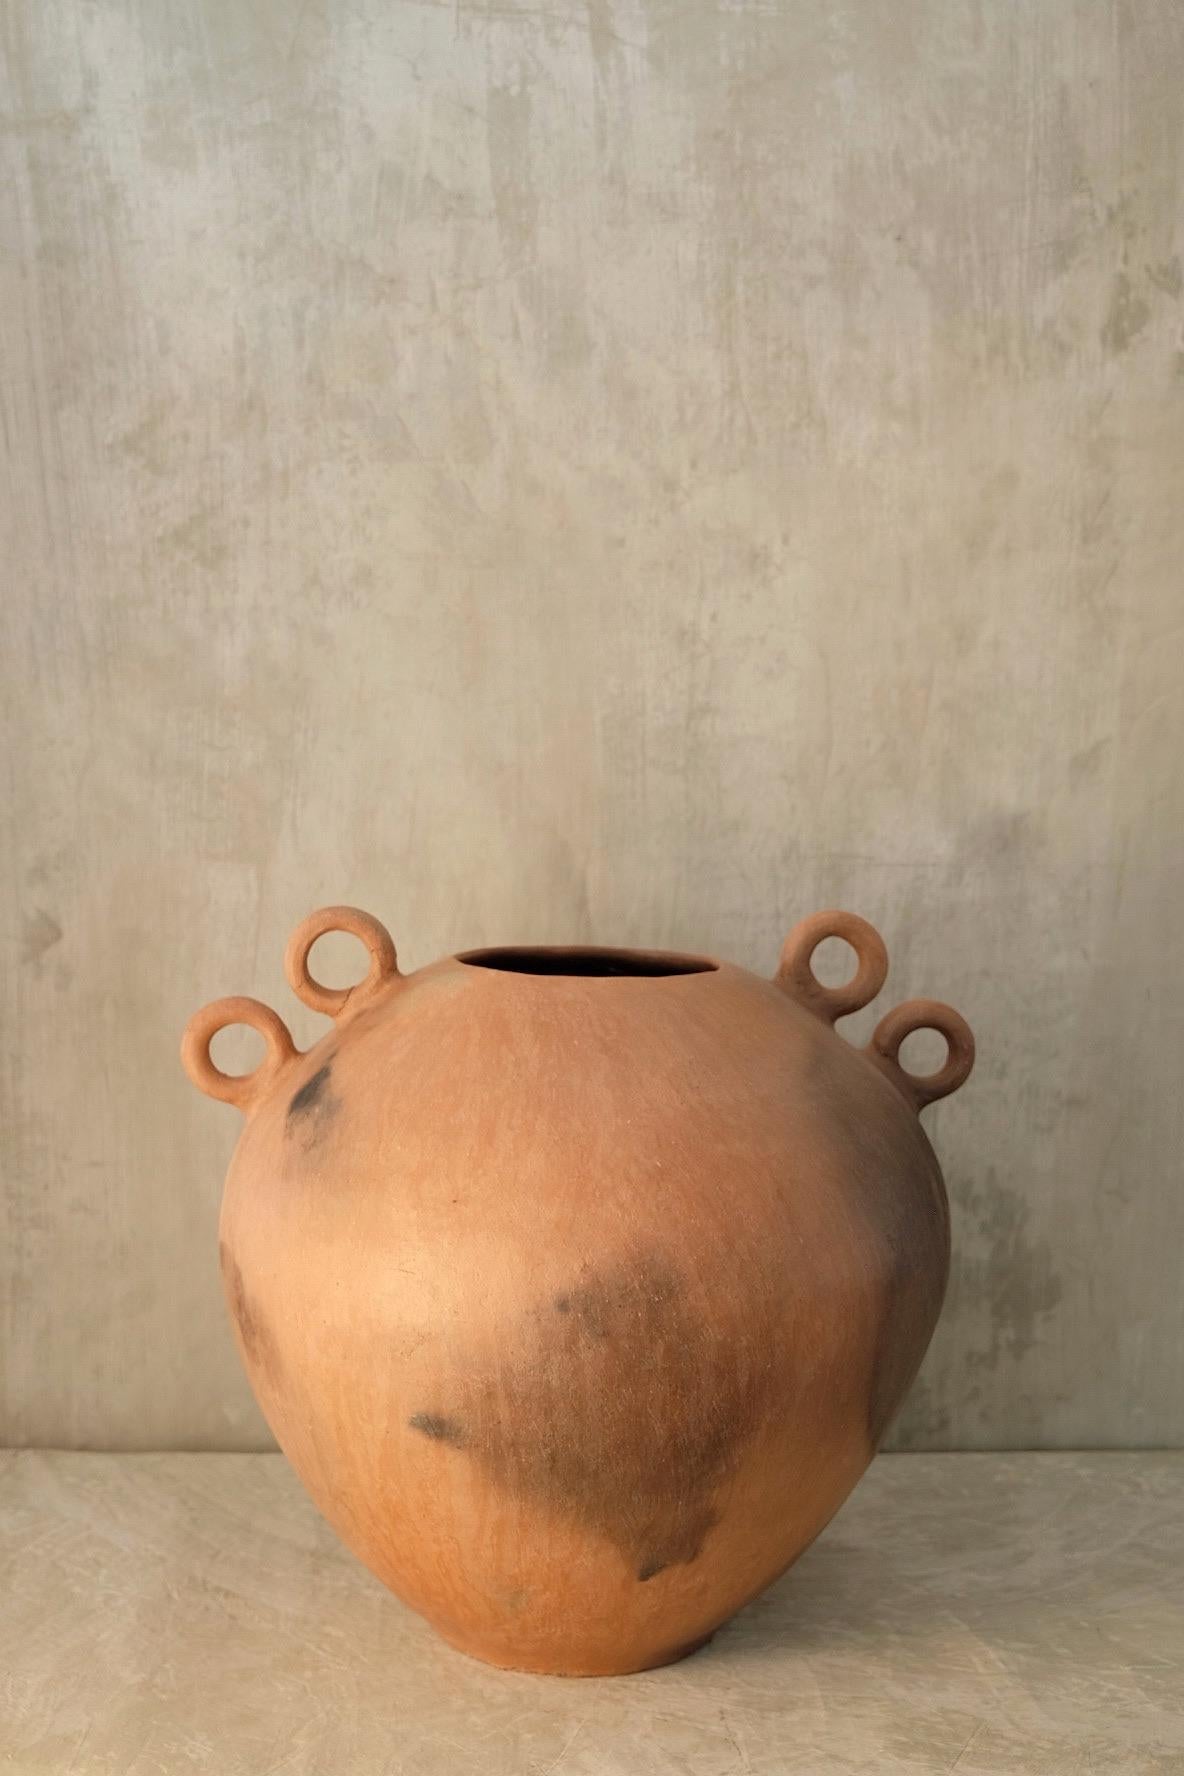 Pair of Tierra Caliente vases by Onora
Dimensions: D 20 x H 30 cm
Materials: Clay

Hand sculpted clay, covered with a mineral based slip and burnished using a quartz stone. 

We are a Mexican brand dedicated to the creation of high end, hand